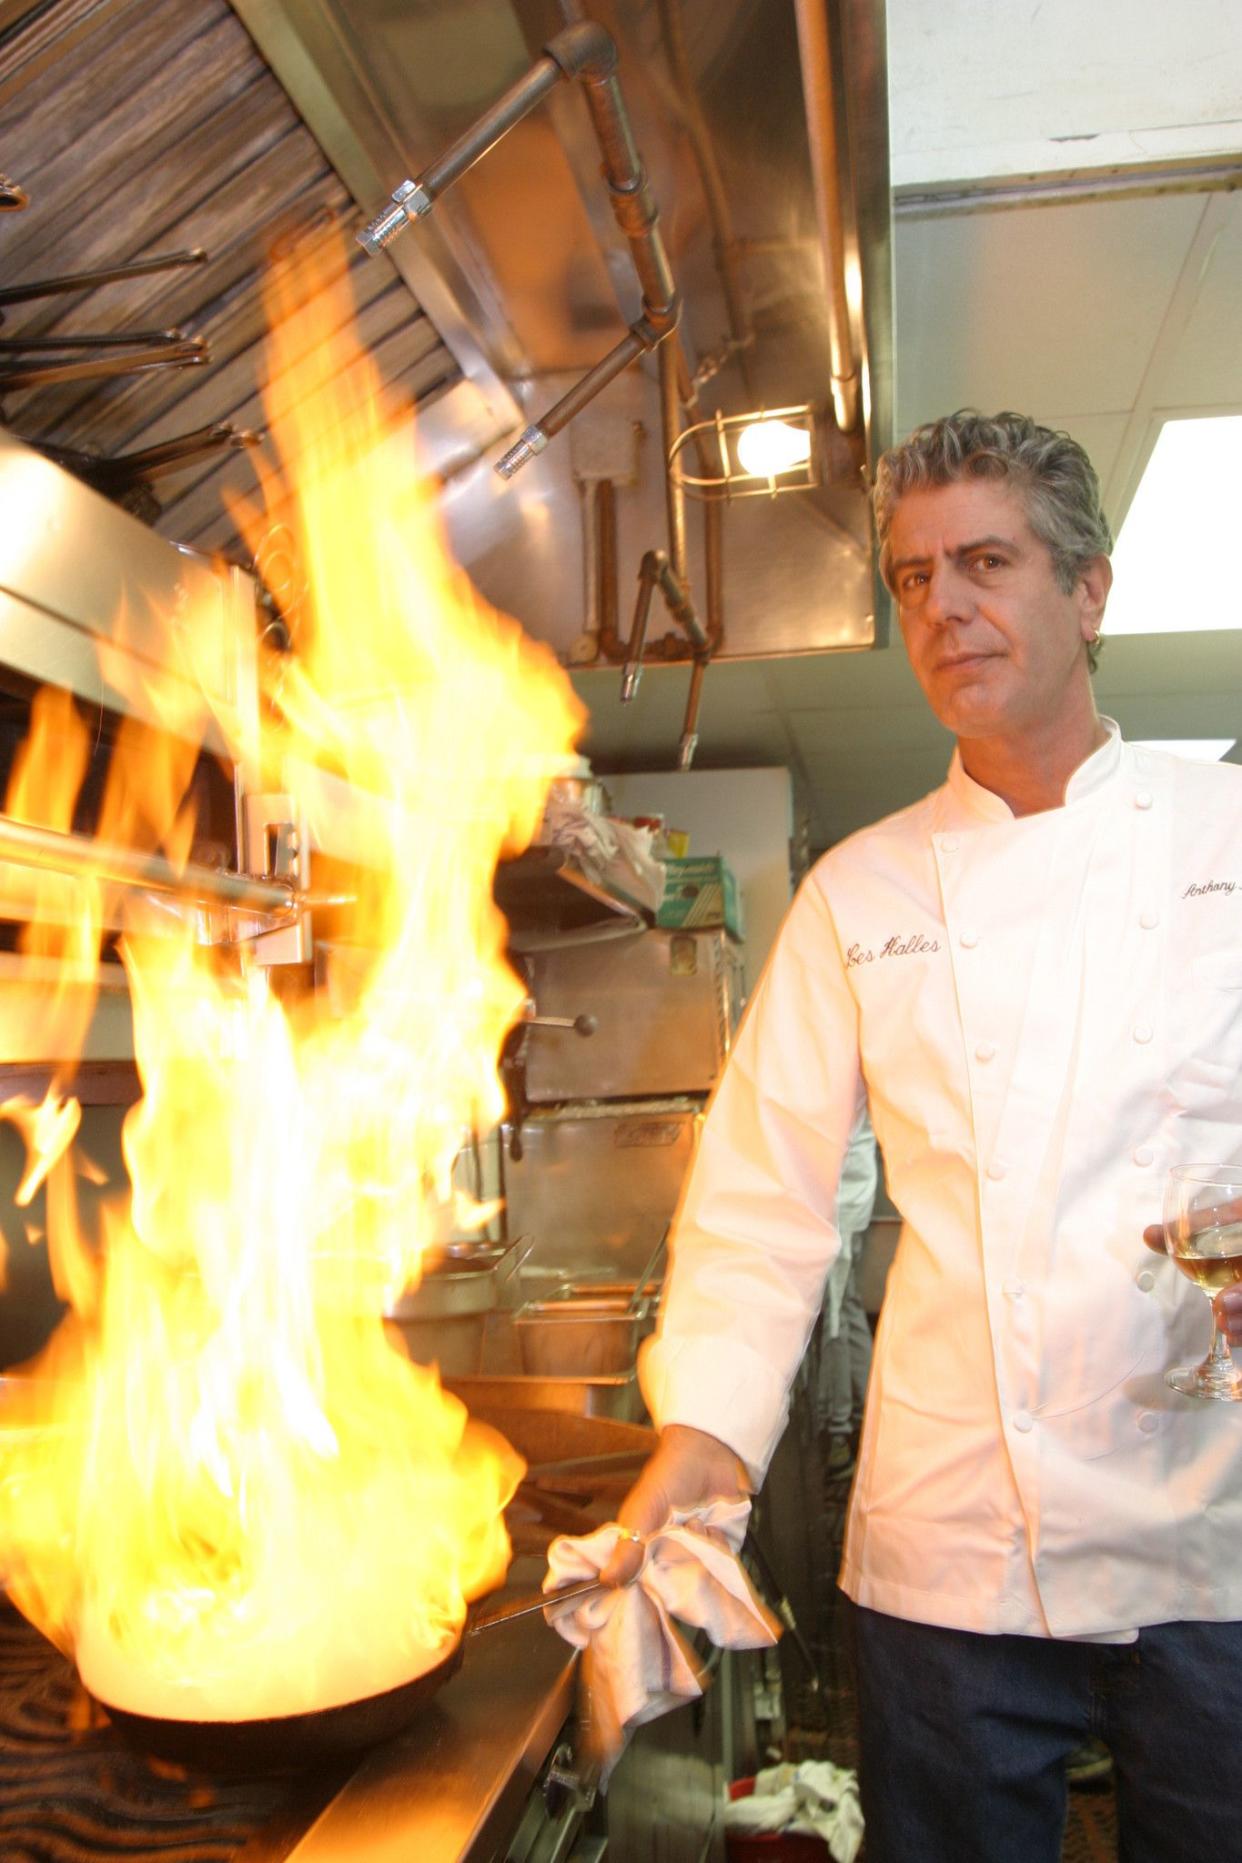 Author and chef of Les Halles Anthony Bourdain shows off his culinary skills in the Les Halles kitchen on Park Avenue in 2004.